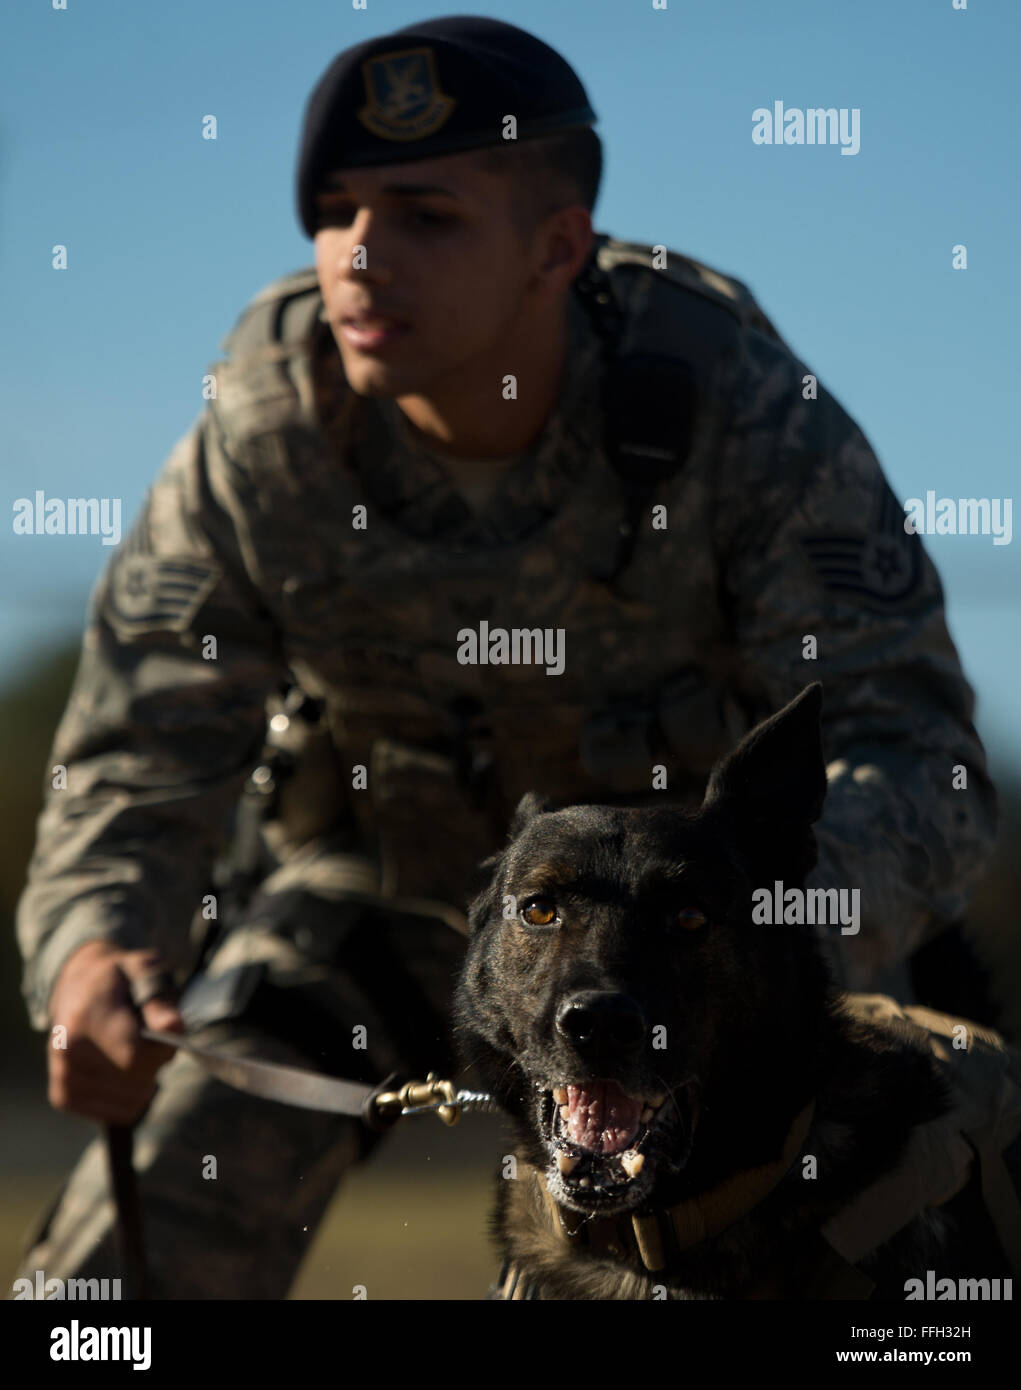 Staff Sgt. Mark Devine, a military working dog handler from the 802nd Security Forces Squadron, holds JJany during a morning exercise training session at Joint Base San Antonio-Lackland. Devine and military working dog handlers assigned to JBSA-Lackland fulfill daily law enforcement requirements or train to remain mission-ready. Stock Photo